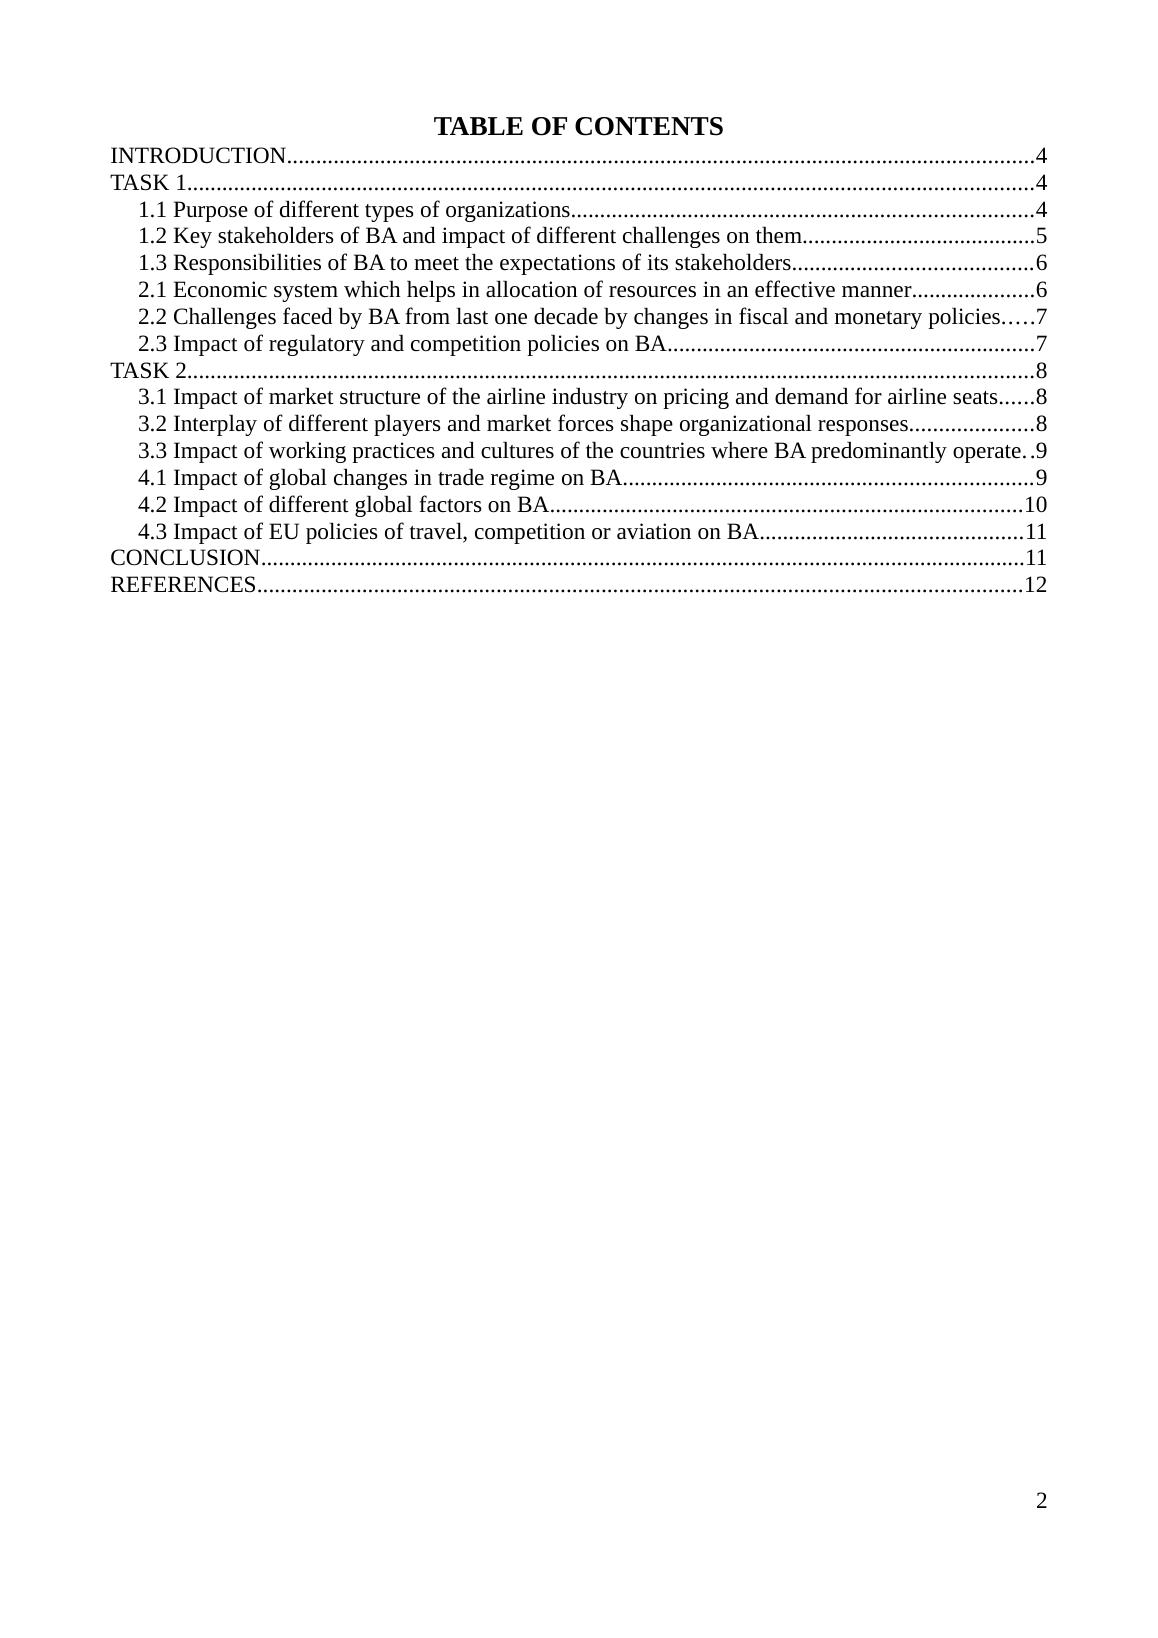 Document on Business Environment_2